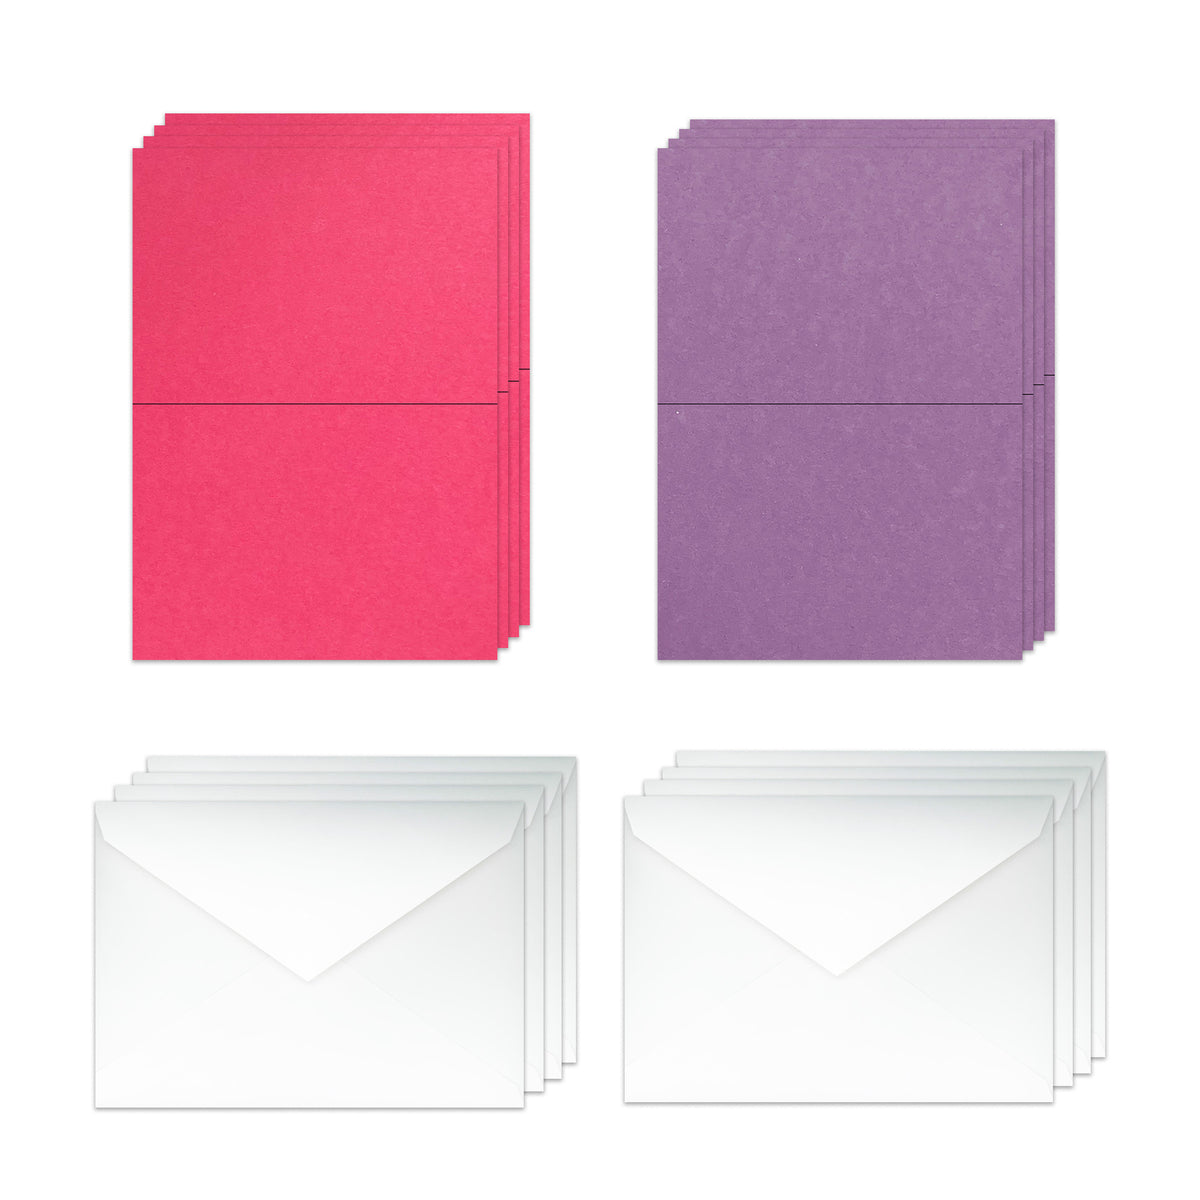 A2 Folded Discount Card Stock and Envelopes  - Pink and Purple